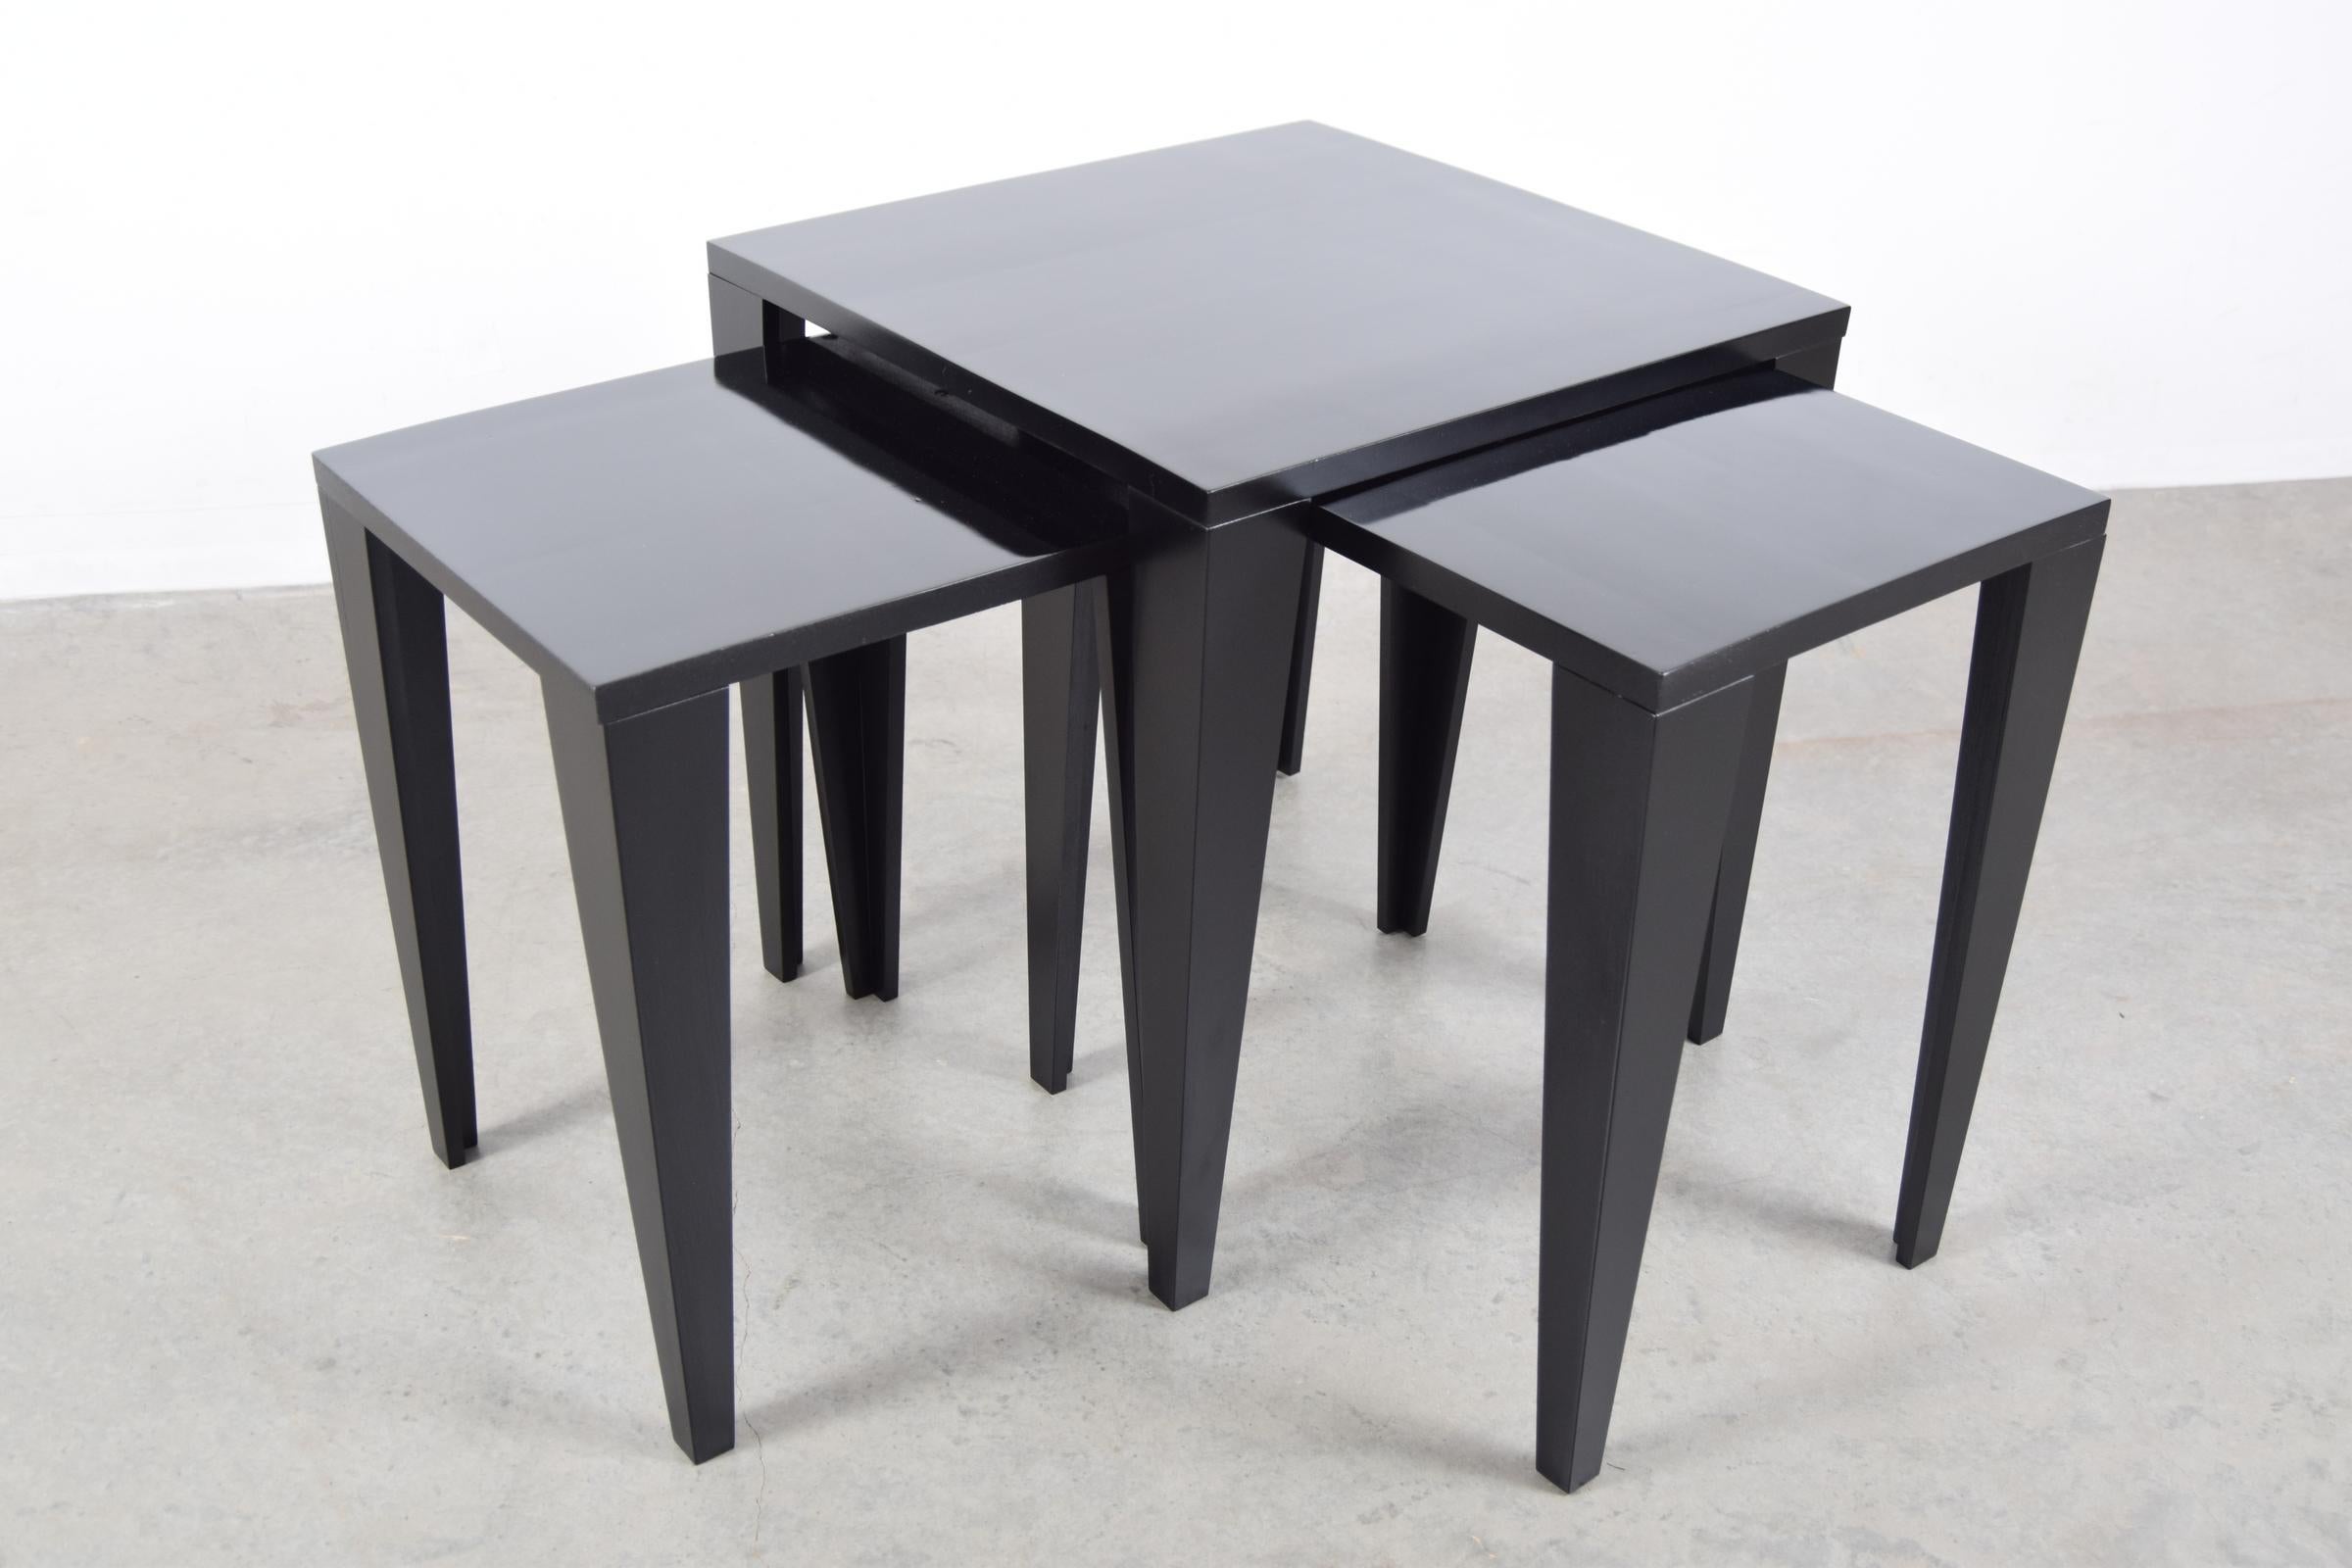 Set of nesting tables in black lacquer, designed by Fran Hosken. Produced by Hosken, Inc., circa 1950.

Tables measure as follows: Large: 20